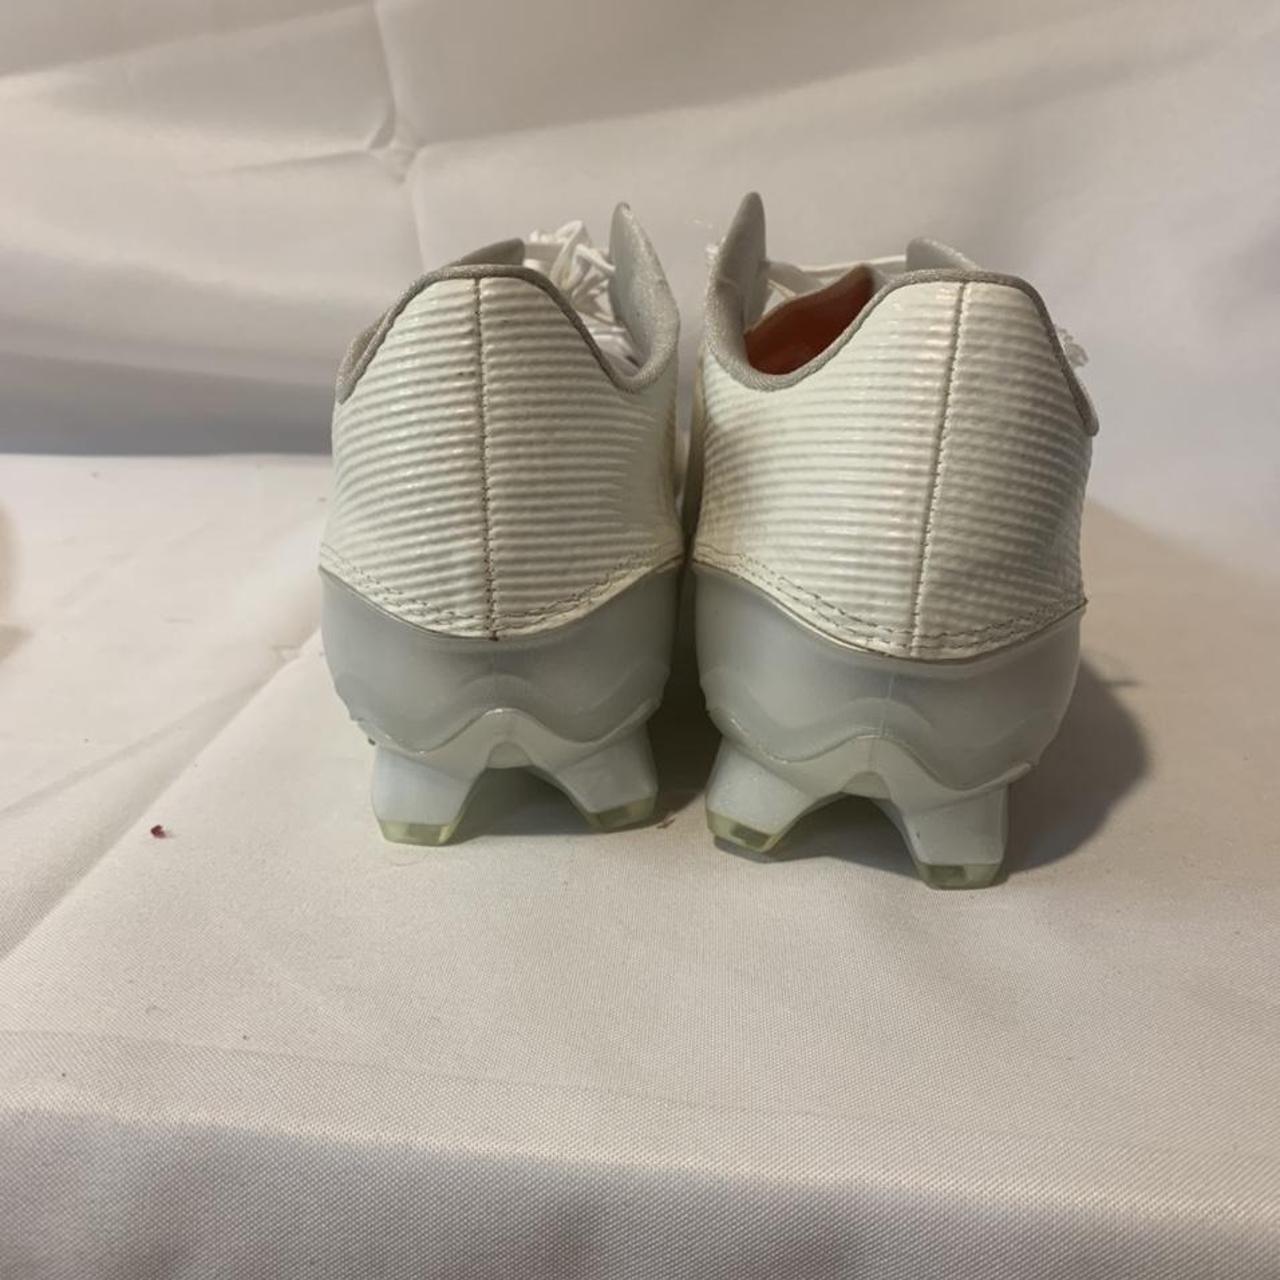 Adidas Men's White and Silver Boots (4)